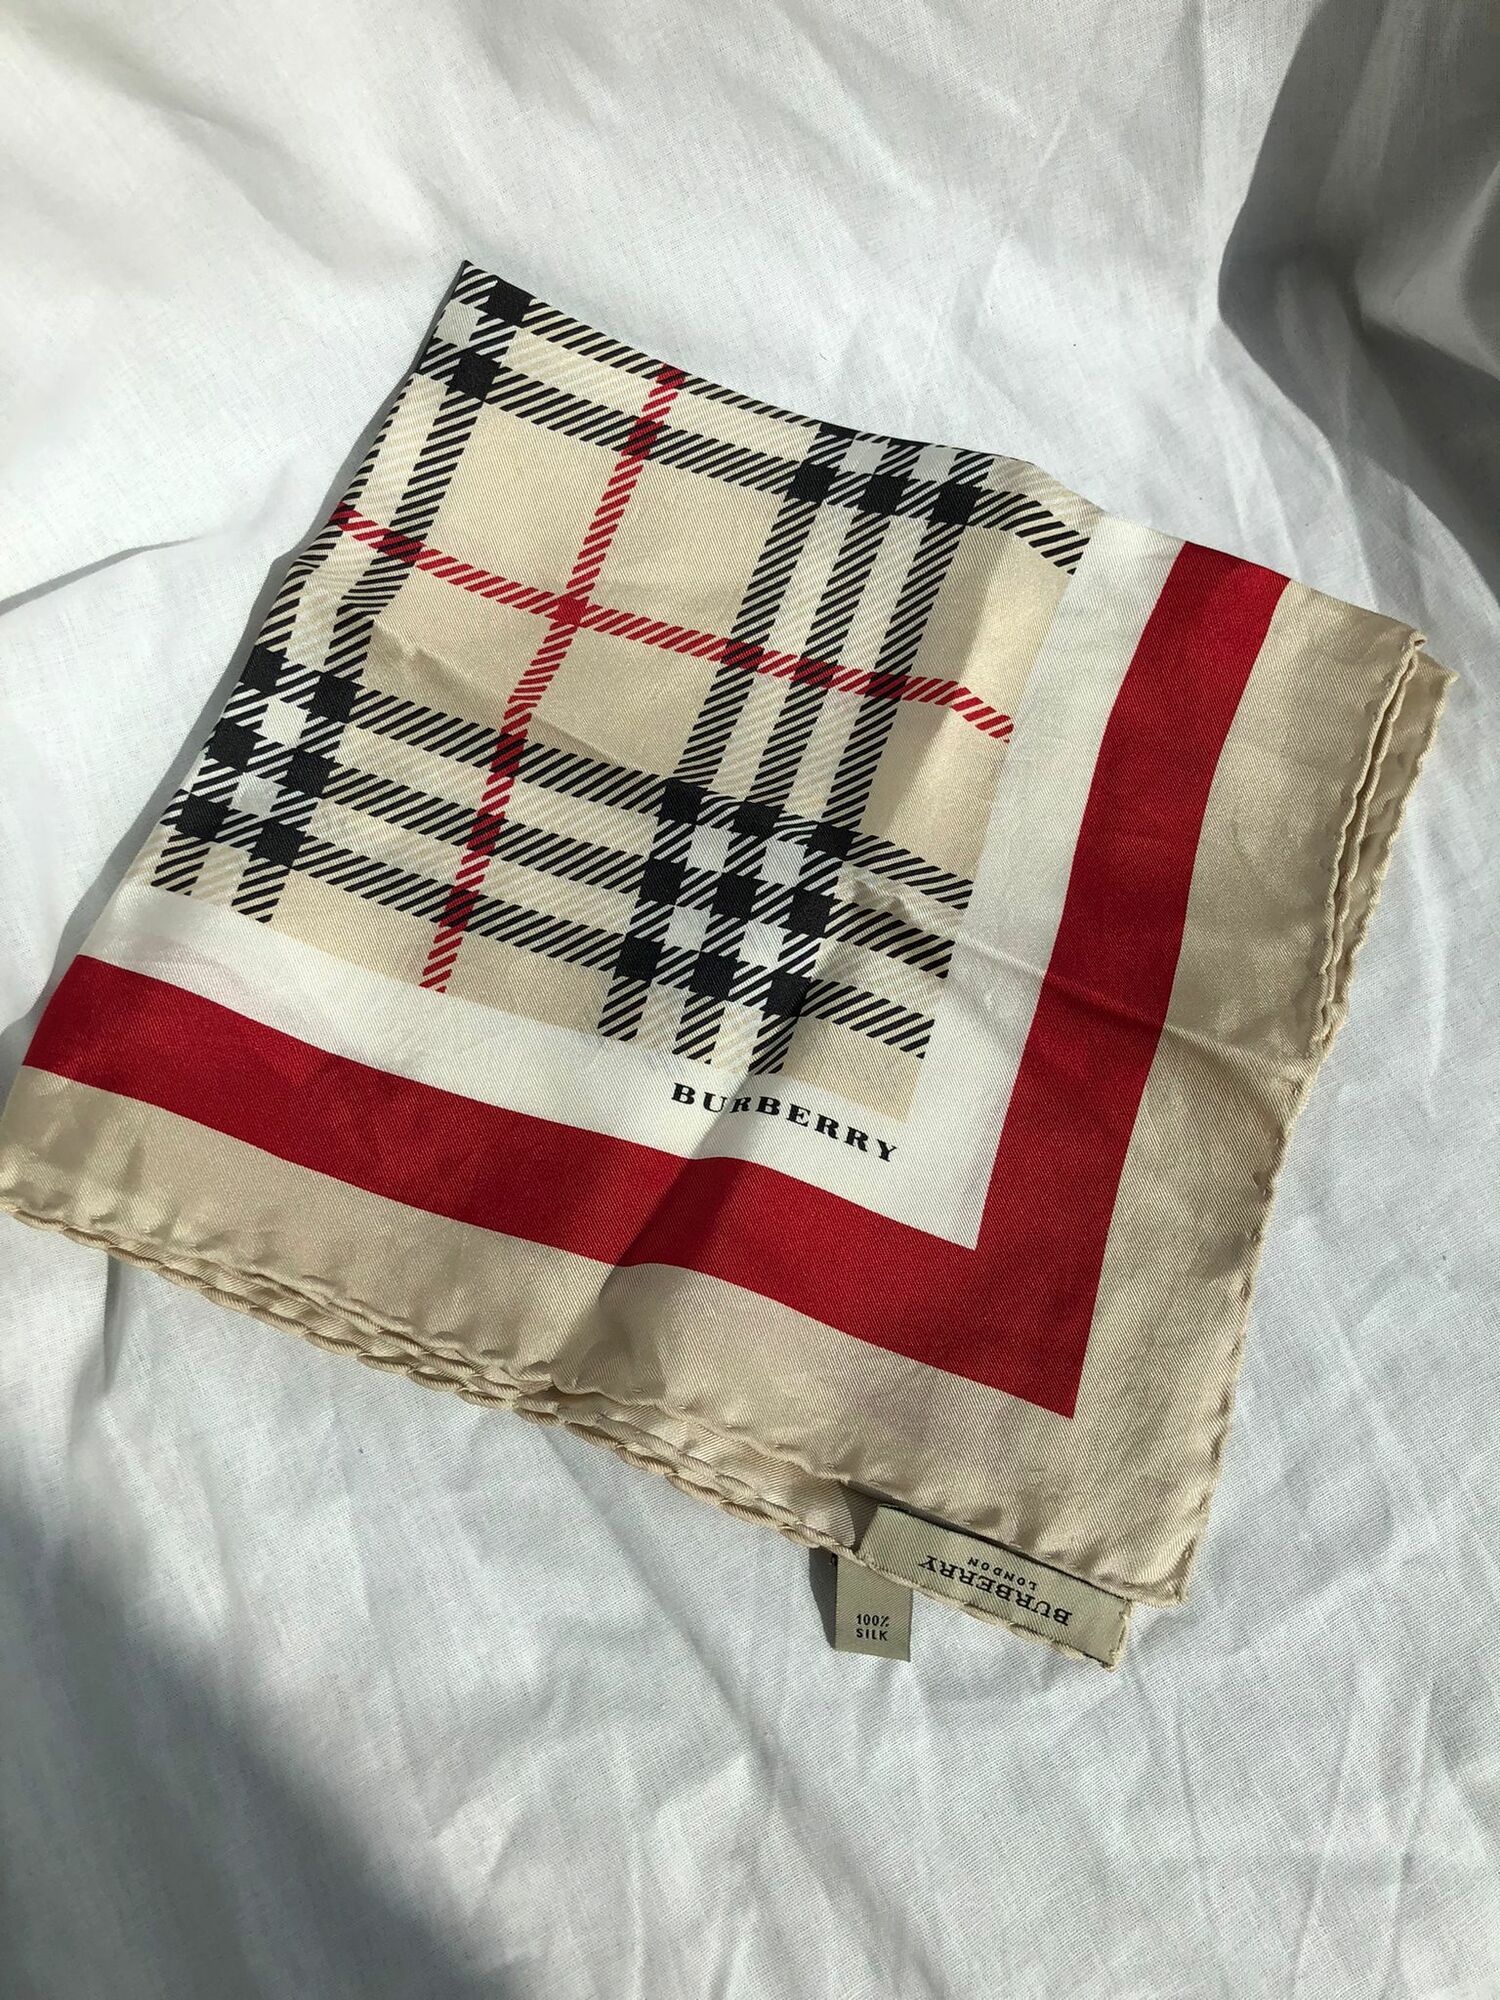 Silk Scarf Burberry, buy pre-owned at 80 EUR